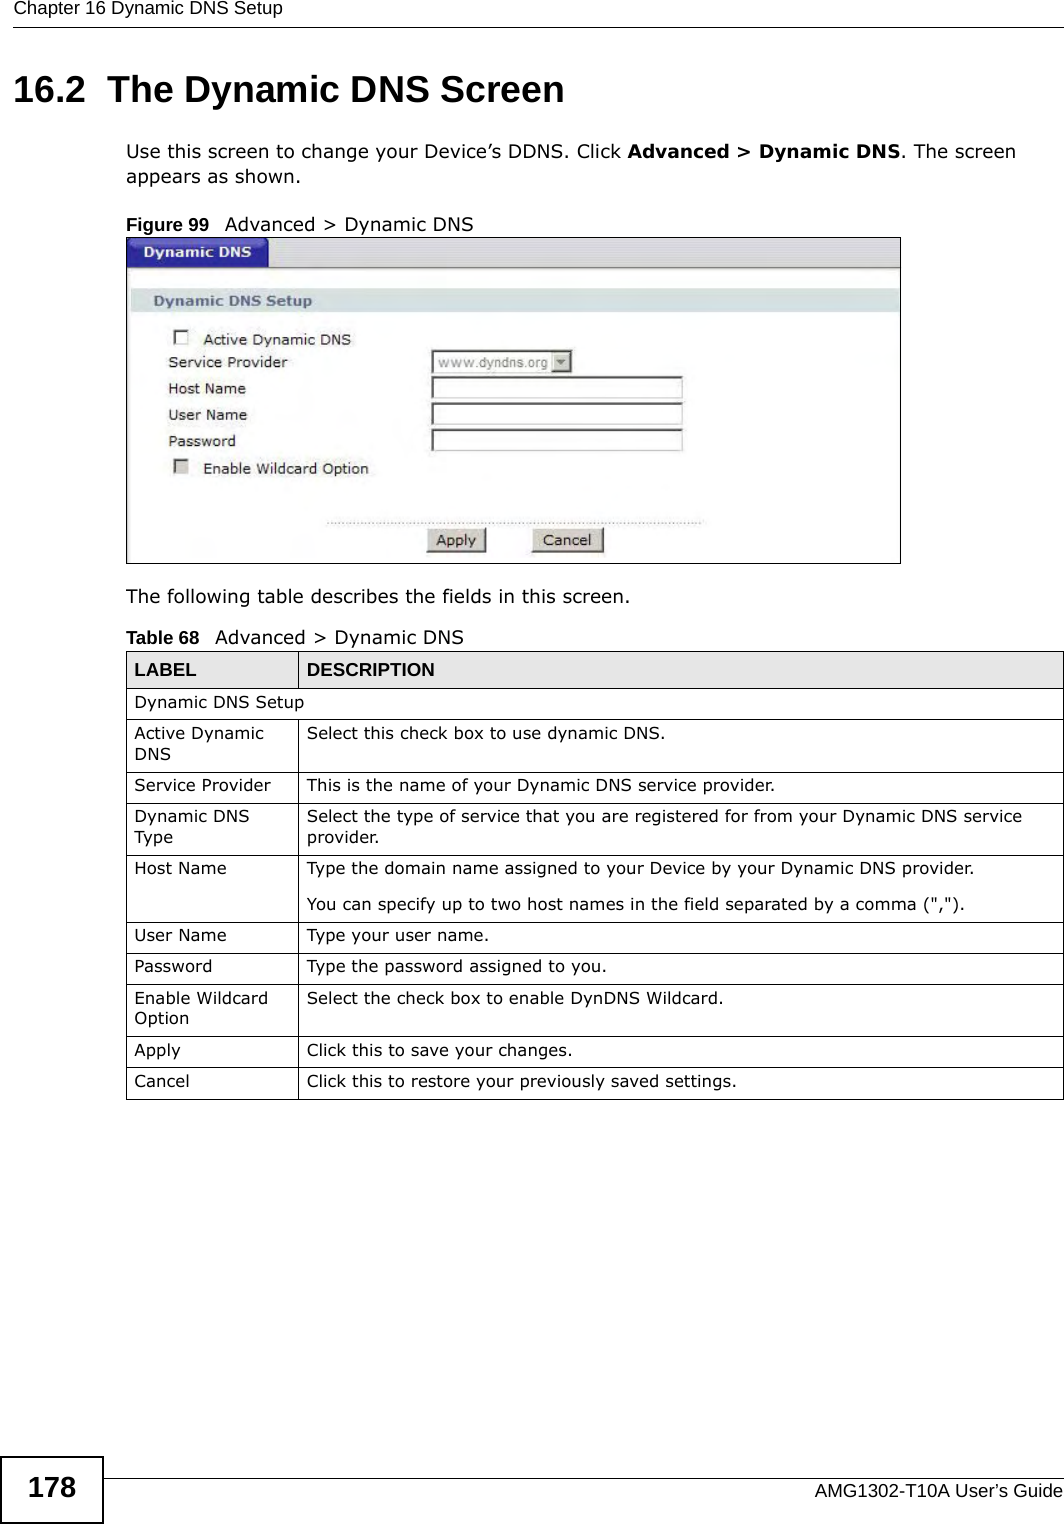 Chapter 16 Dynamic DNS SetupAMG1302-T10A User’s Guide17816.2  The Dynamic DNS ScreenUse this screen to change your Device’s DDNS. Click Advanced &gt; Dynamic DNS. The screen appears as shown.Figure 99   Advanced &gt; Dynamic DNSThe following table describes the fields in this screen. Table 68   Advanced &gt; Dynamic DNSLABEL DESCRIPTIONDynamic DNS SetupActive Dynamic DNSSelect this check box to use dynamic DNS.Service Provider This is the name of your Dynamic DNS service provider.Dynamic DNS TypeSelect the type of service that you are registered for from your Dynamic DNS service provider.Host Name Type the domain name assigned to your Device by your Dynamic DNS provider.You can specify up to two host names in the field separated by a comma (&quot;,&quot;).User Name Type your user name.Password Type the password assigned to you.Enable Wildcard OptionSelect the check box to enable DynDNS Wildcard.Apply Click this to save your changes.Cancel Click this to restore your previously saved settings.